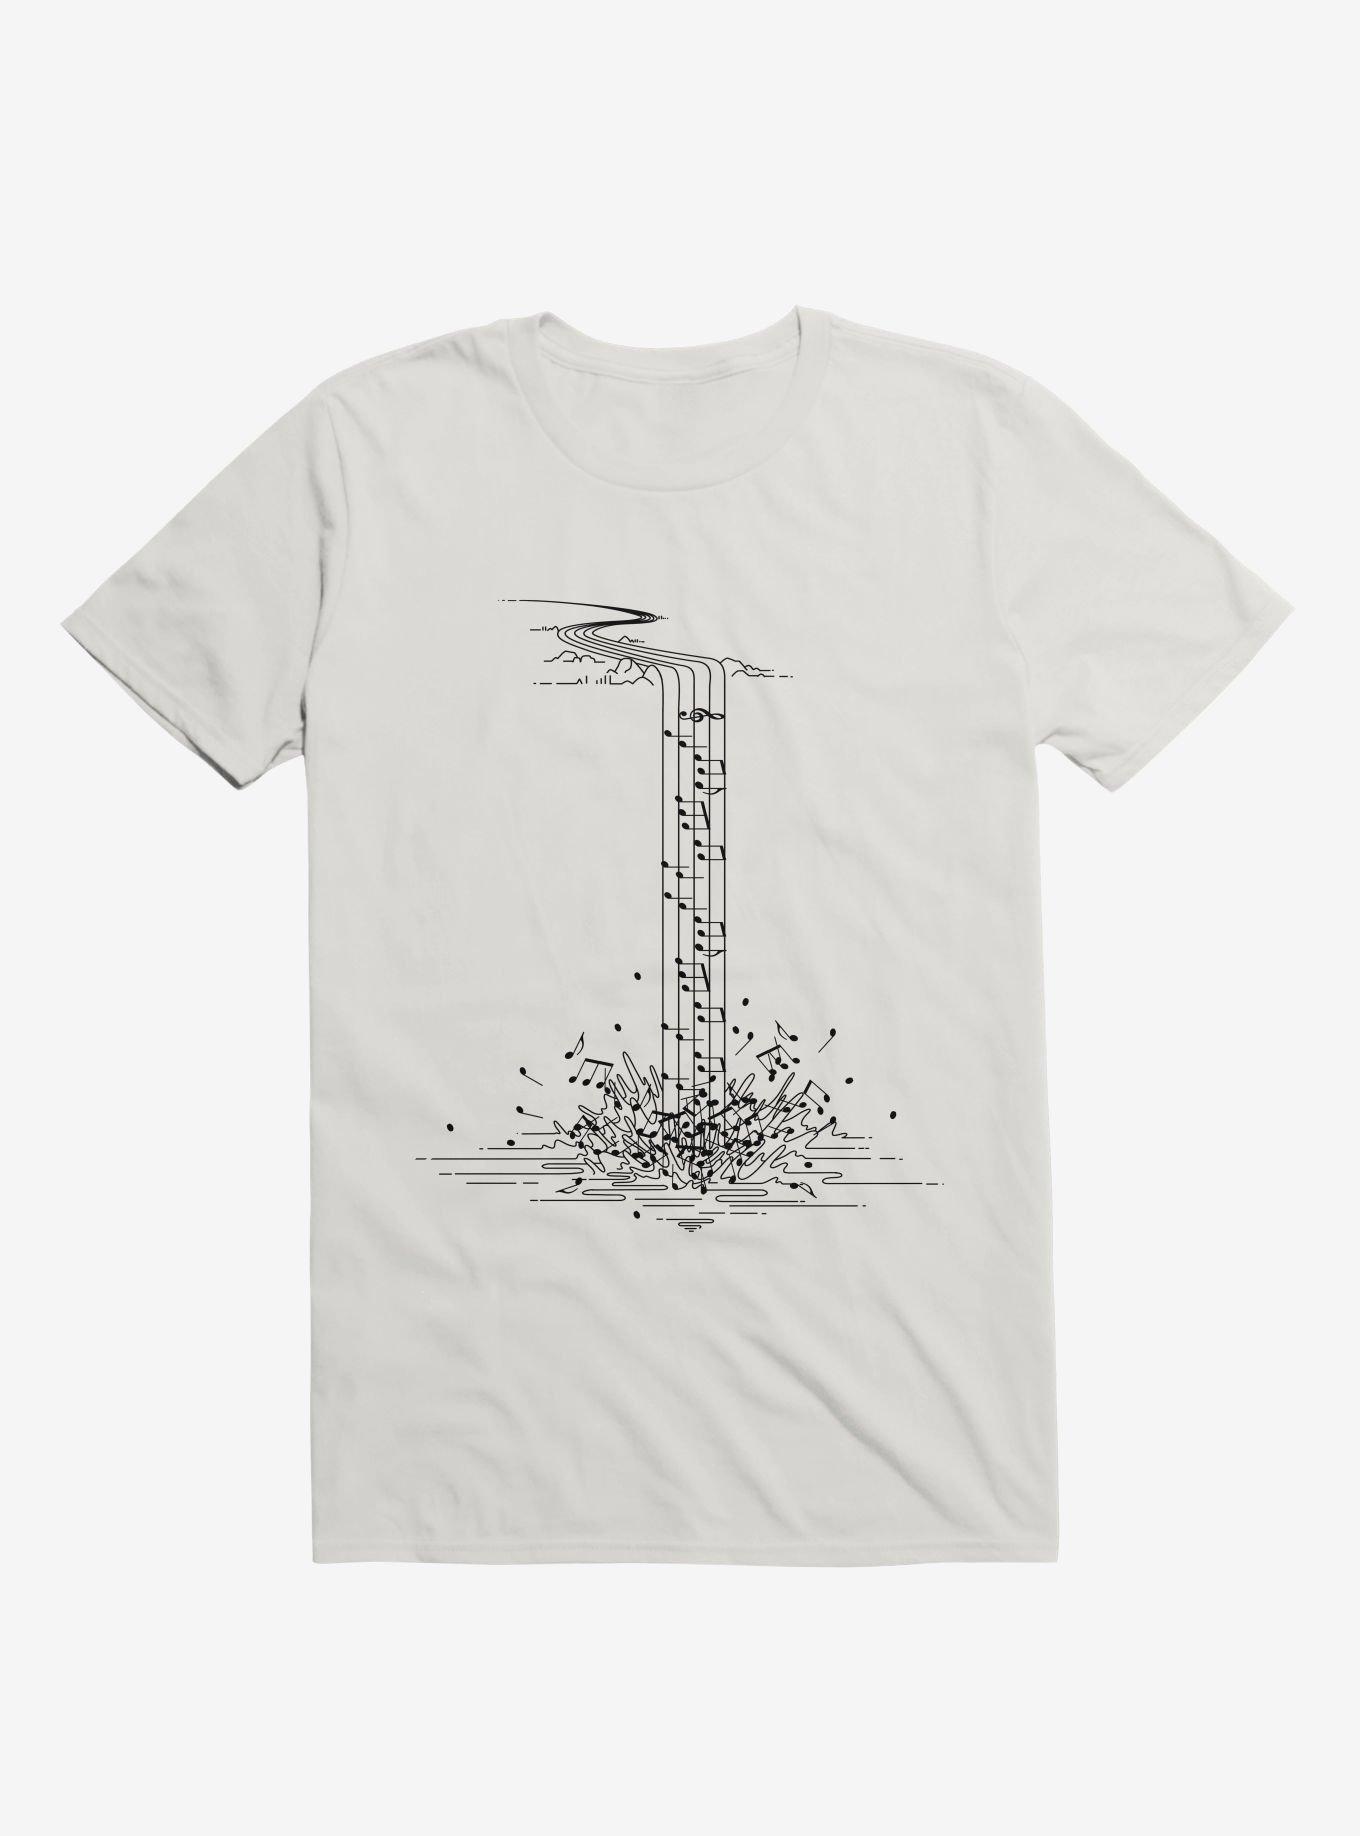 Song of Nature Waterfall T-Shirt, WHITE, hi-res